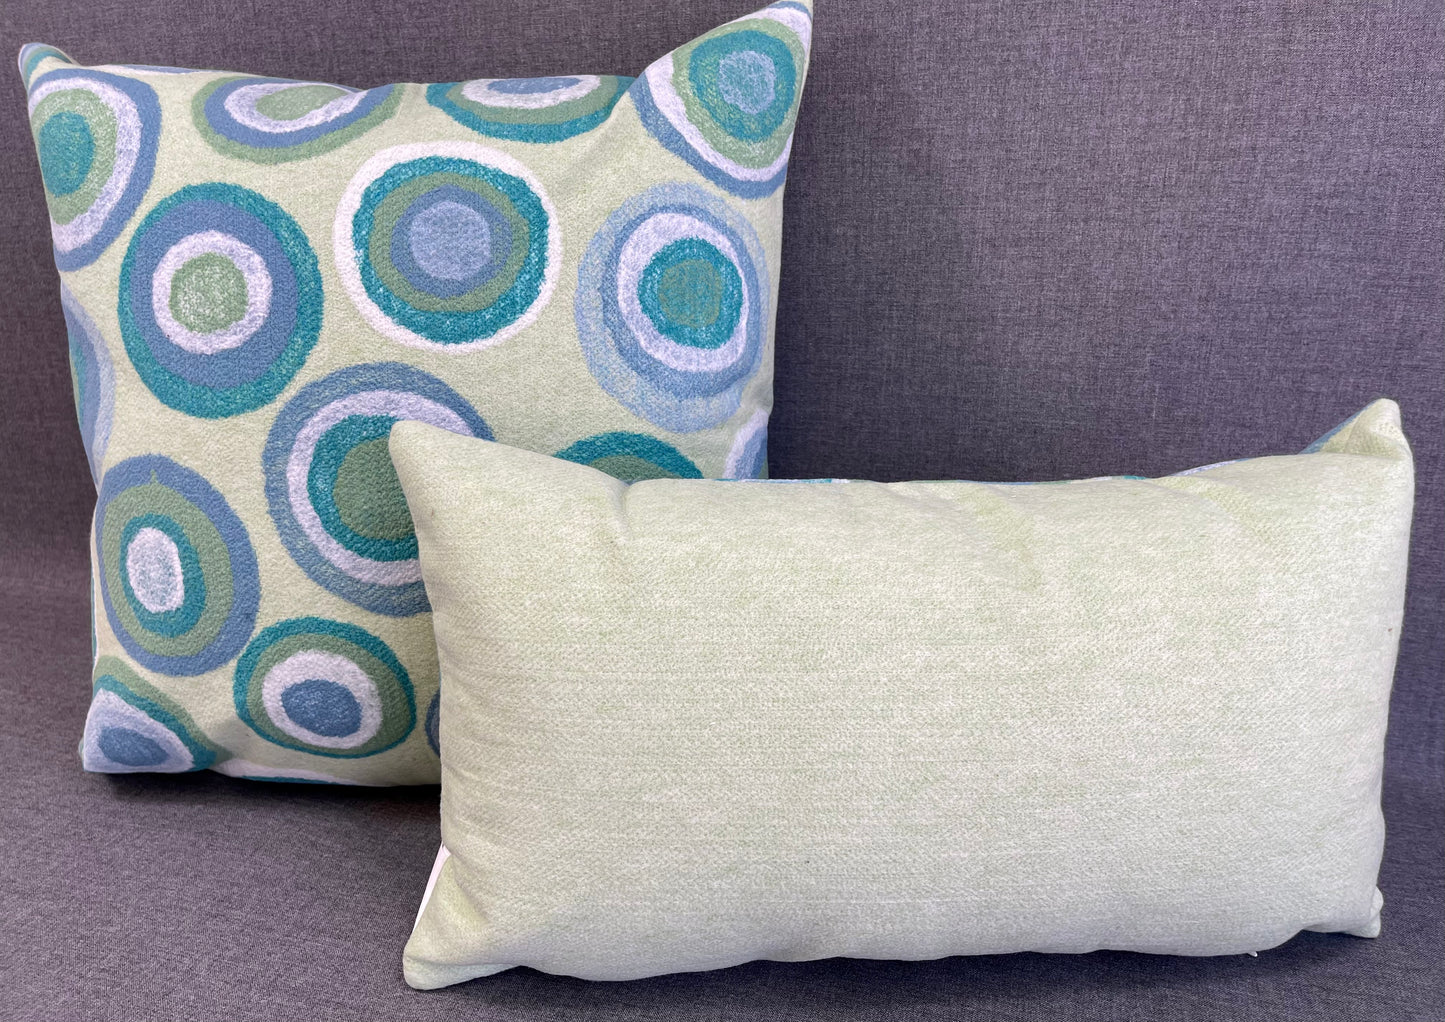 Luxury Outdoor Lumbar Pillow - 18" x 10" - Lillypad; Circles of Green, White and Turquoise on a yellow/green background